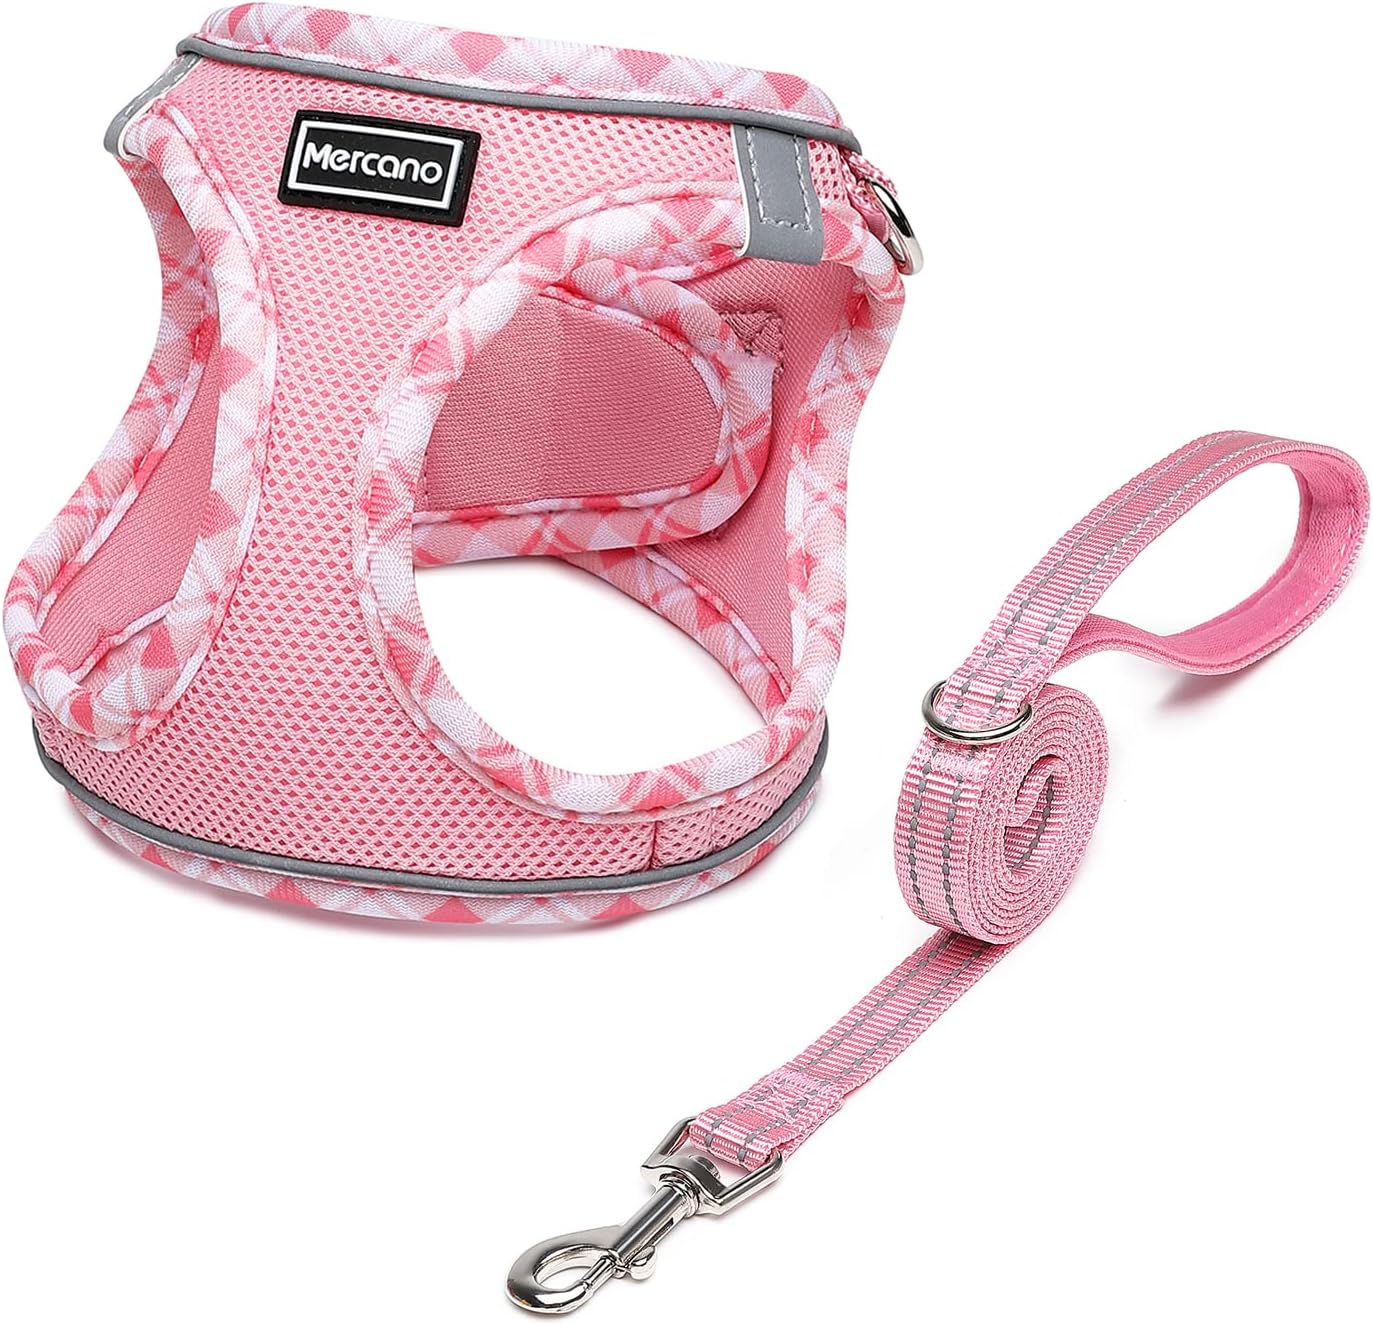 Mercano Soft Mesh Dog Harness and Leash Set, No-Chock Step-in Reflective Breathable Lightweight Easy Walk Escape Proof Vest Harnesses with Safety Buckle for Small Medium Dogs, Cats (Pink, M)